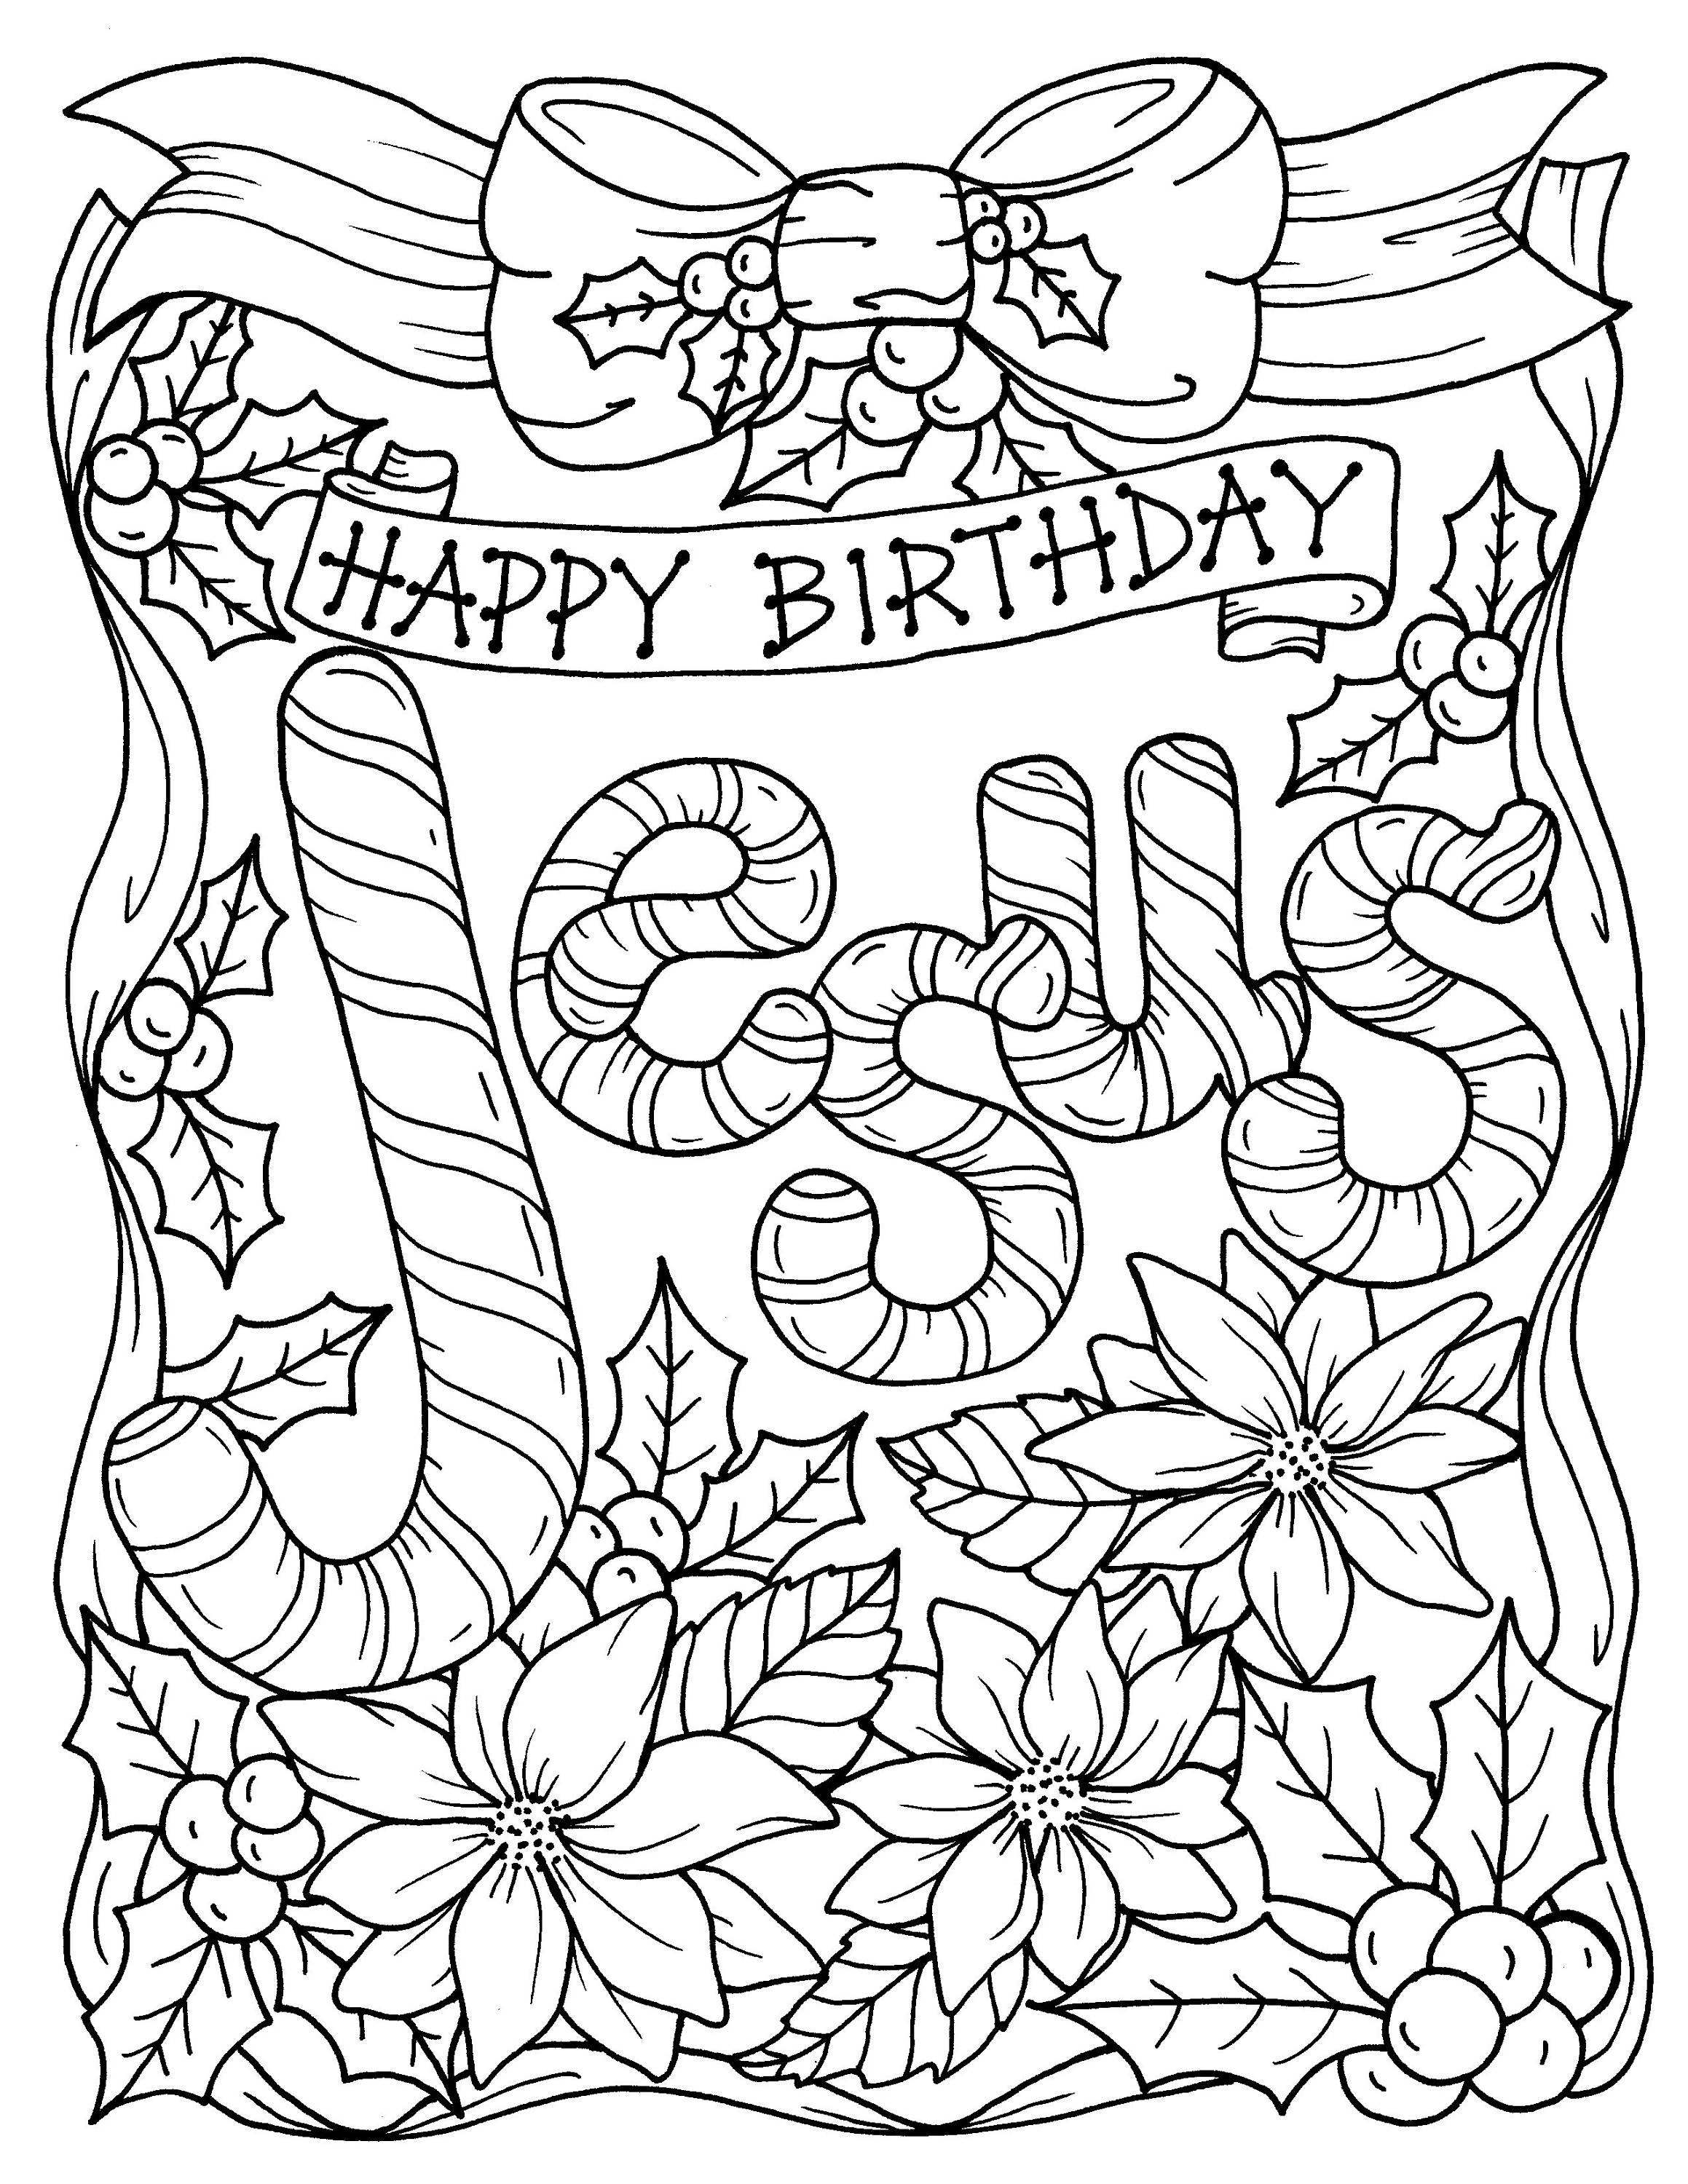 5-pages-christmas-coloring-christian-religious-scripture